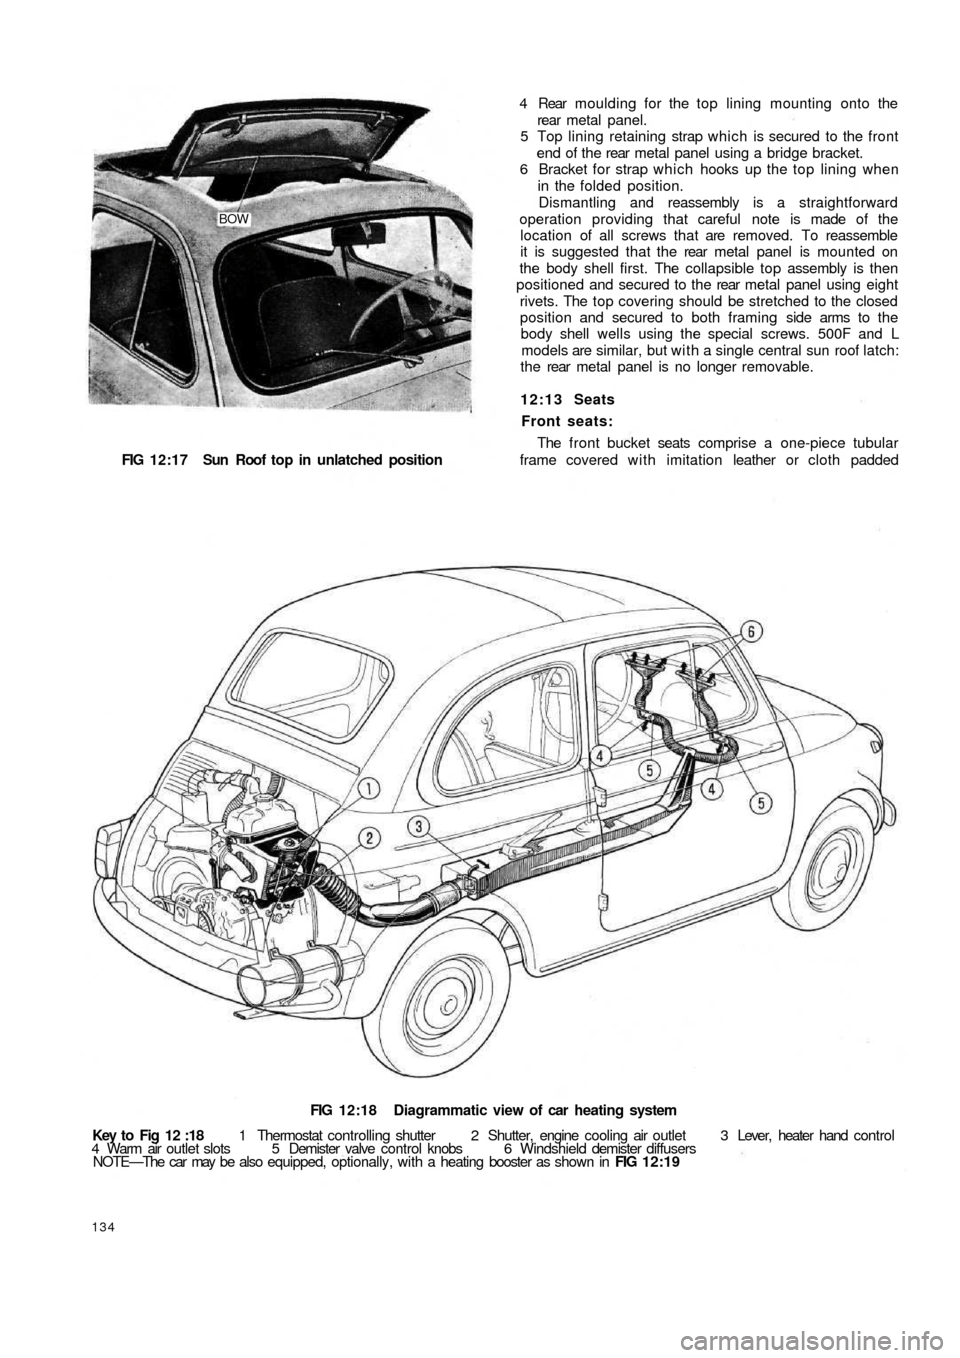 FIAT 500 1969 1.G Workshop Manual BOW
FIG 12:17  Sun Roof  top   in  unlatched position
FIG 12:18 Diagrammatic view of car heating system
Key to Fig 12 :18 1 Thermostat controlling shutter  2  Shutter,  engine  cooling air outlet  3 L